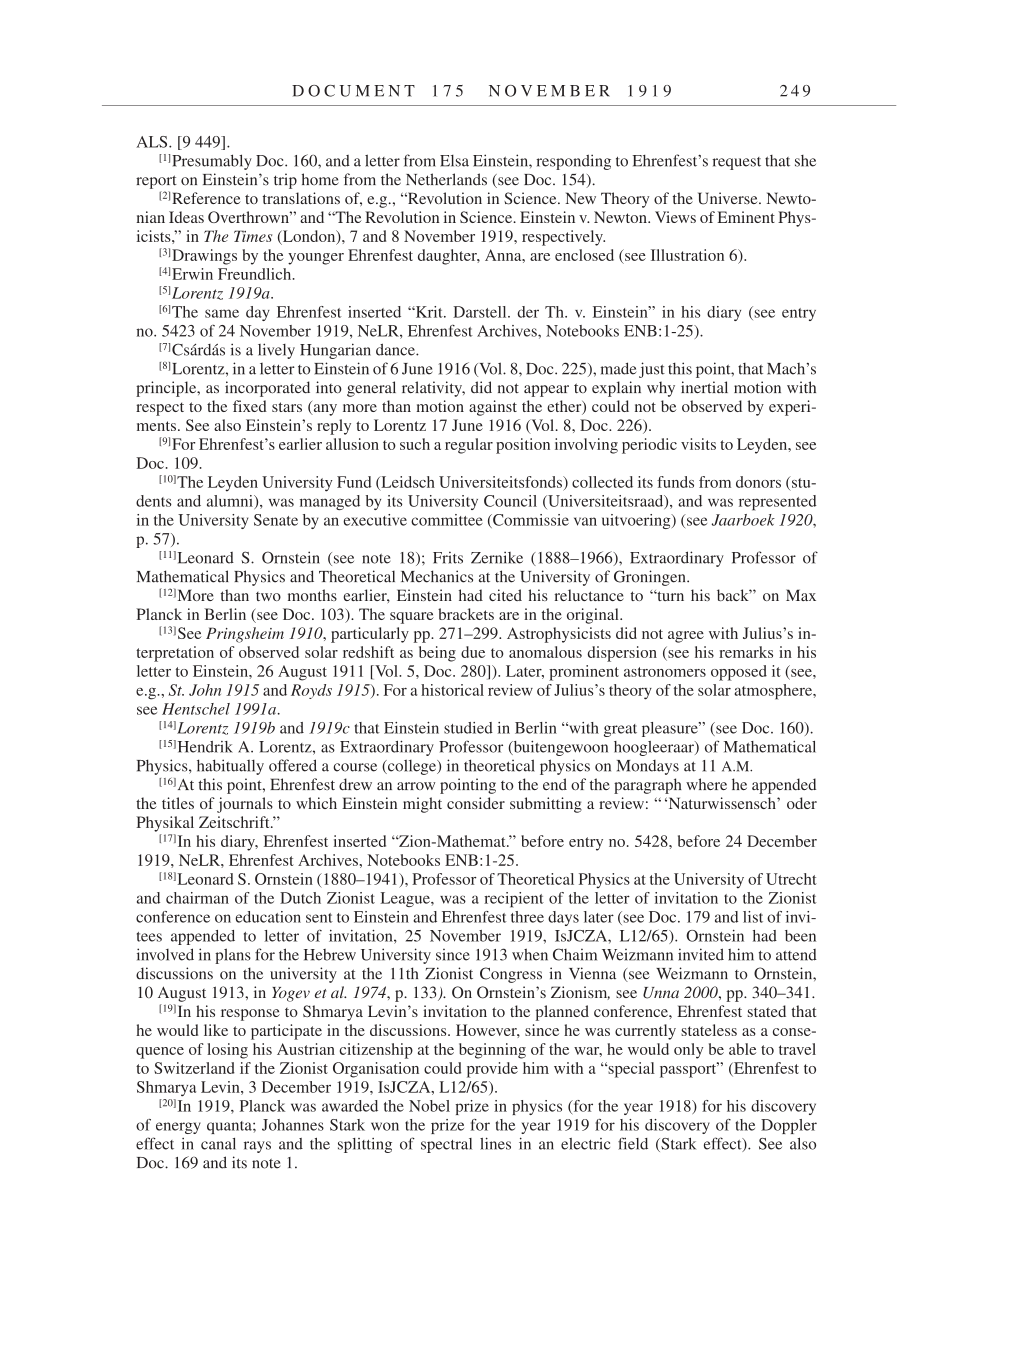 Volume 9: The Berlin Years: Correspondence January 1919-April 1920 page 249